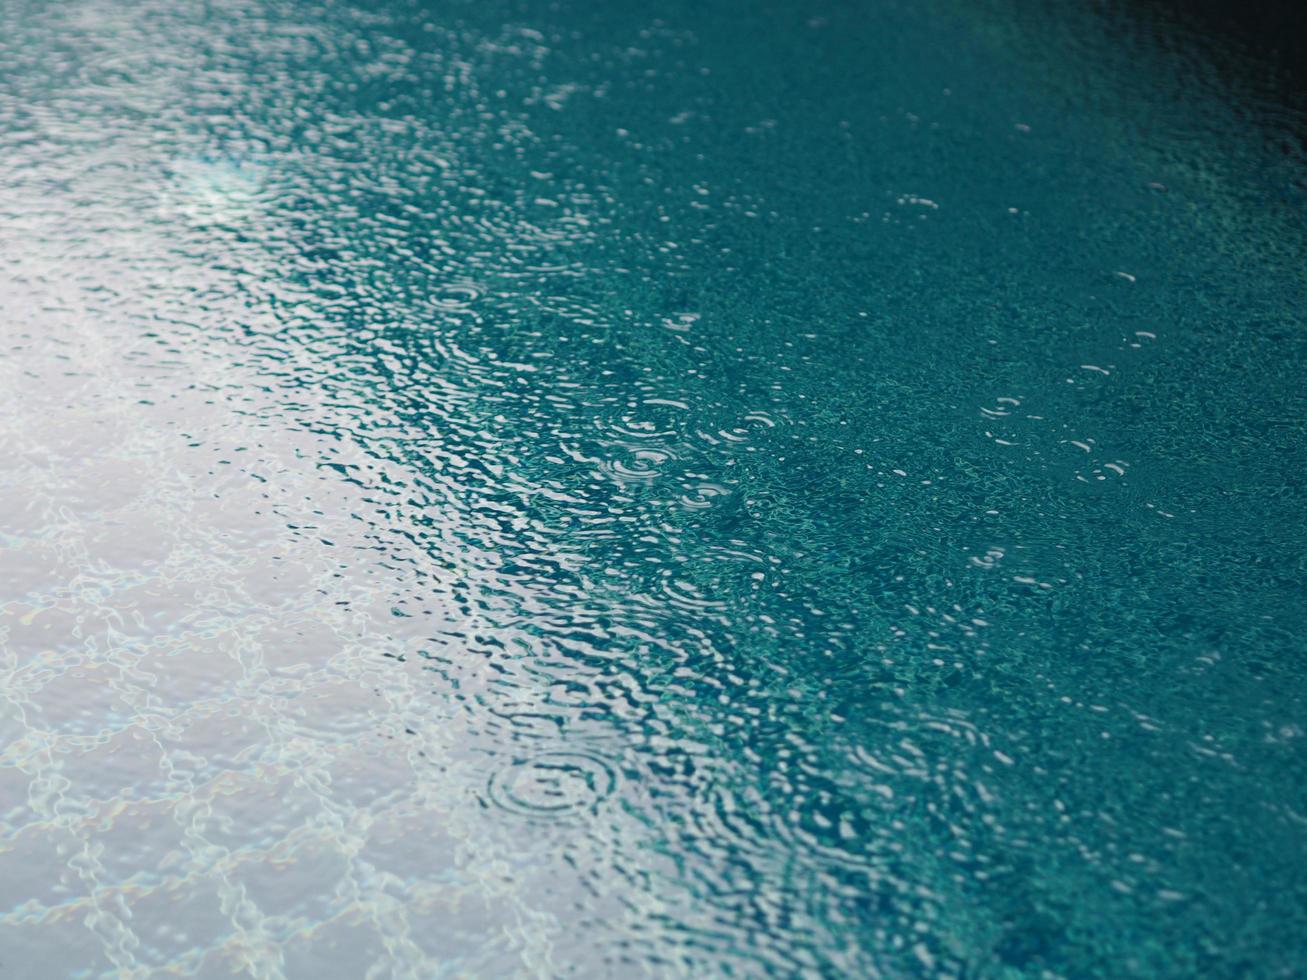 Rain drops falling blue water in pool background ripples on the surface texture, glittering bokeh abstract photo